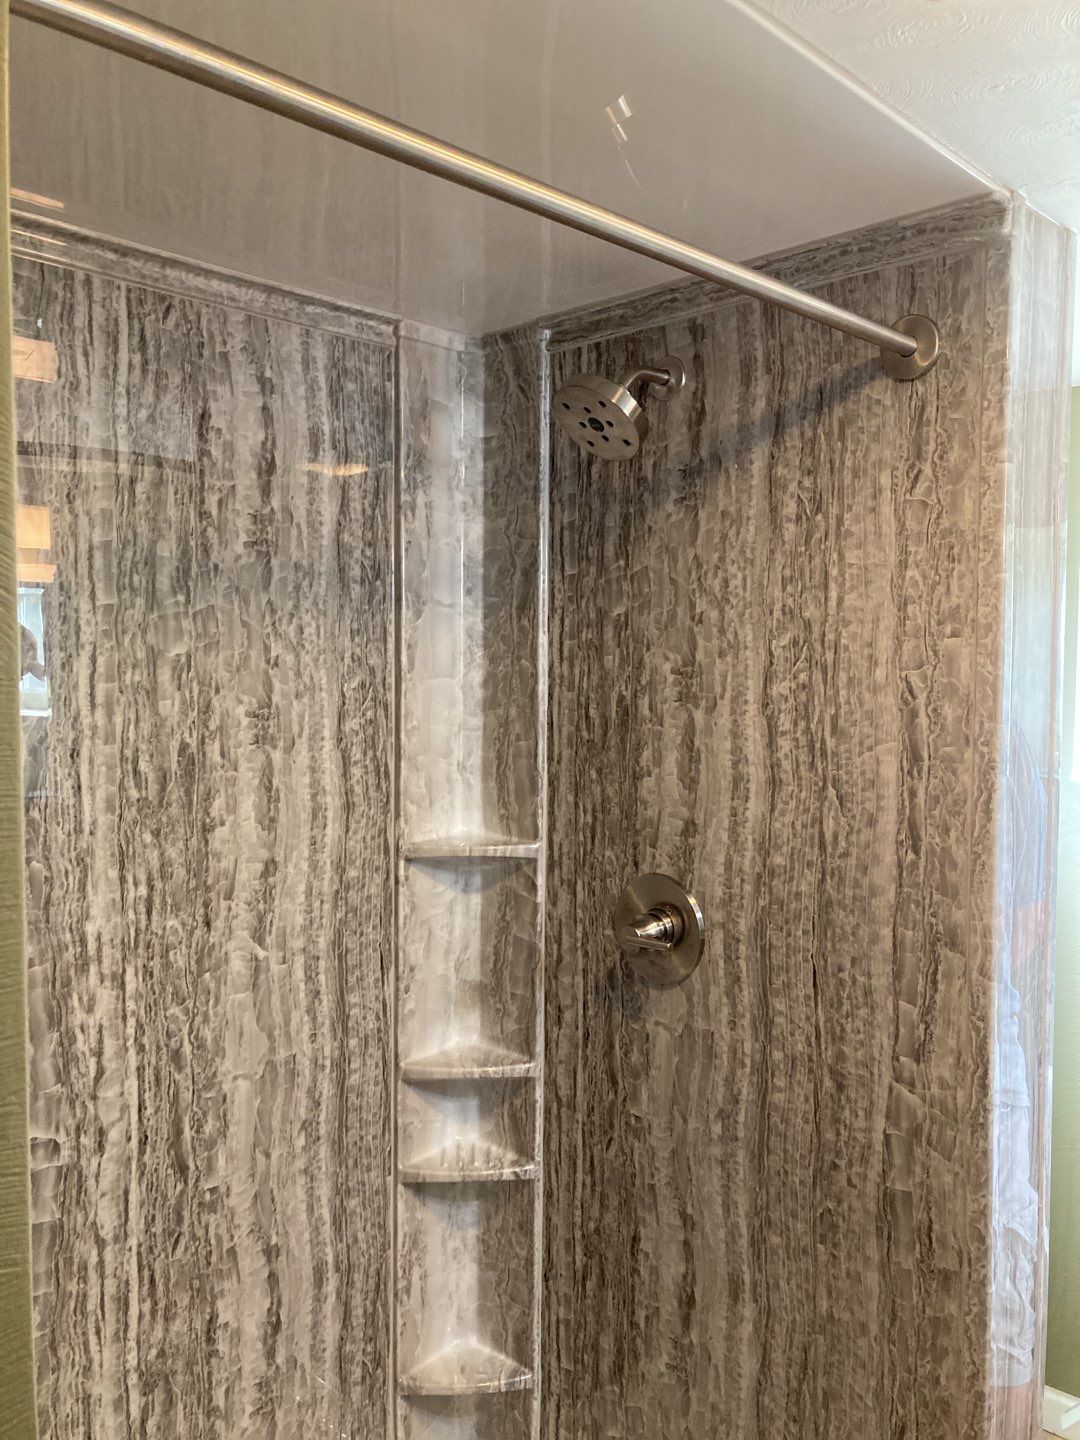 After photos of the Walk-in Shower Update